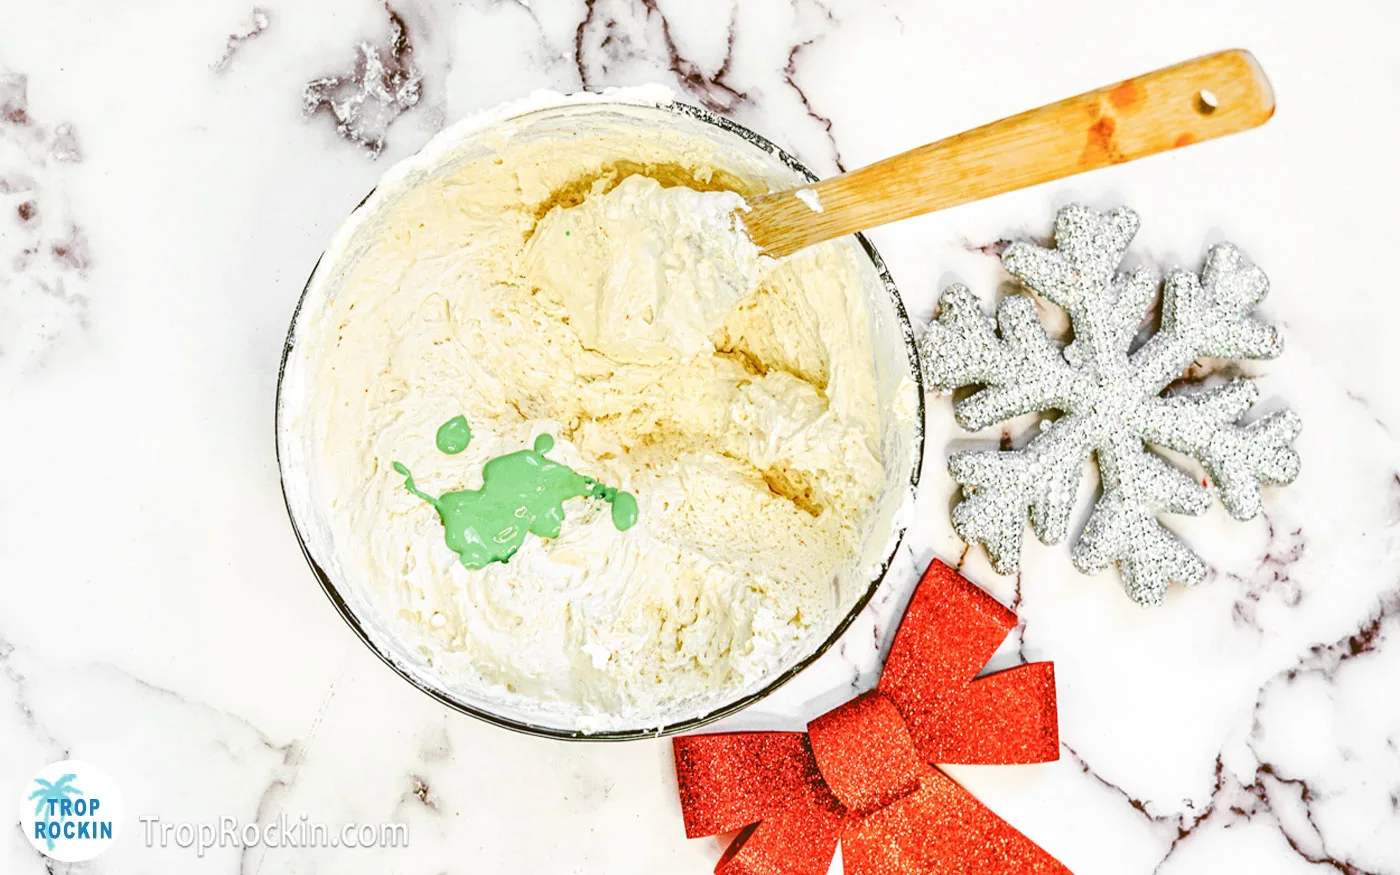 Green food coloring added to the bowl of Grinch dip ingredients.